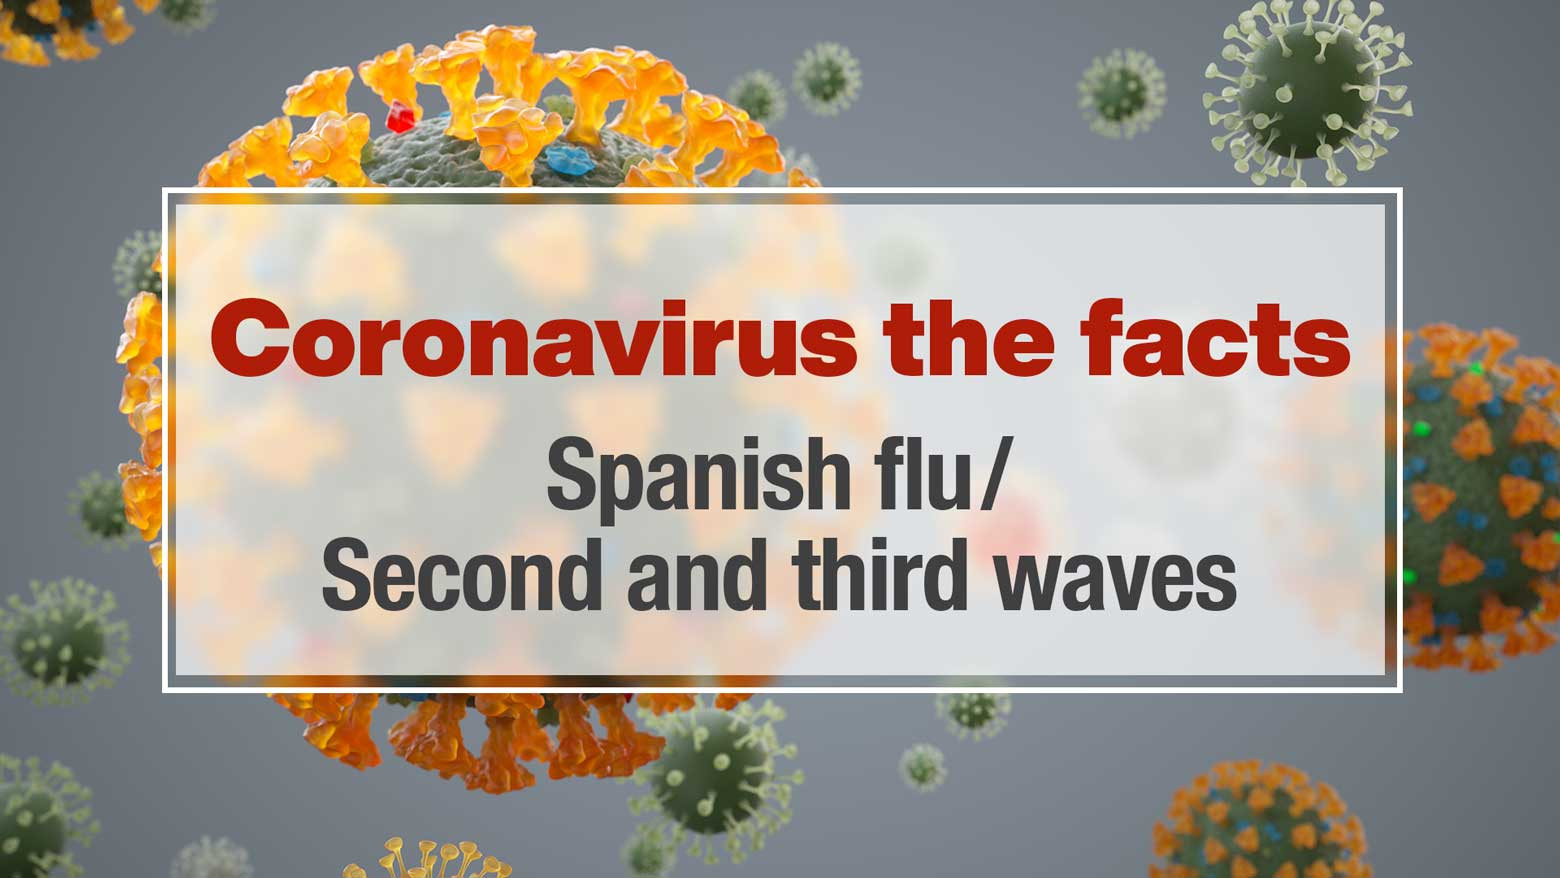 How does the coronavirus pandemic compare to the Spanish flu? 
Will there be a second and third wave?